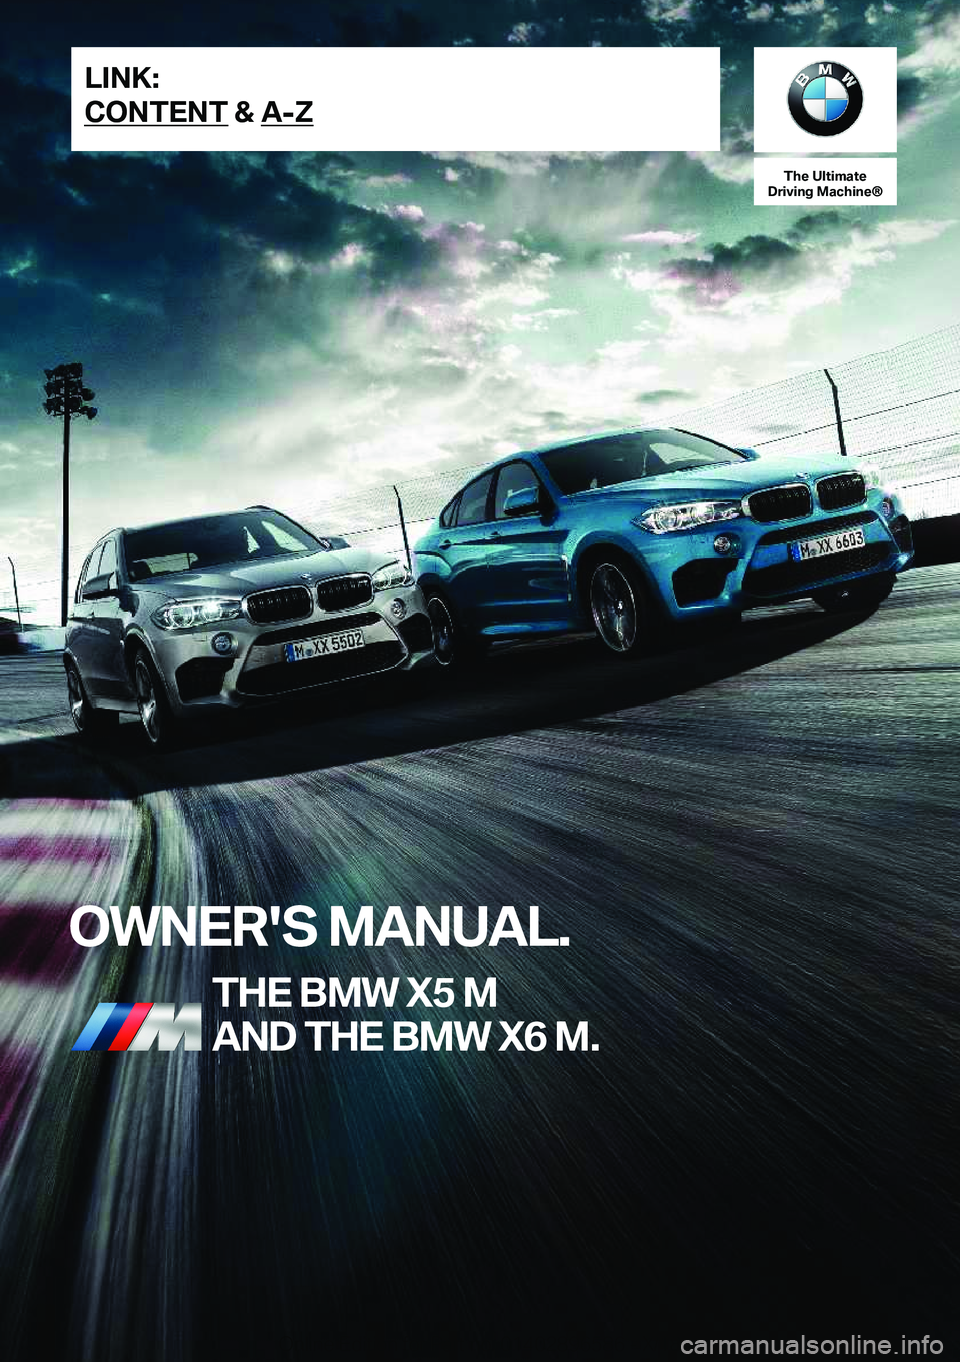 BMW X6 M 2019  Owners Manual �T�h�e��U�l�t�i�m�a�t�e
�D�r�i�v�i�n�g��M�a�c�h�i�n�e�n
�O�W�N�E�R�'�S��M�A�N�U�A�L�.�T�H�E��B�M�W��X�5��M
�A�N�D��T�H�E��B�M�W��X�6��M�.�L�I�N�K�:
�C�O�N�T�E�N�T��&��A�-�Z�O�n�l�i�n�e